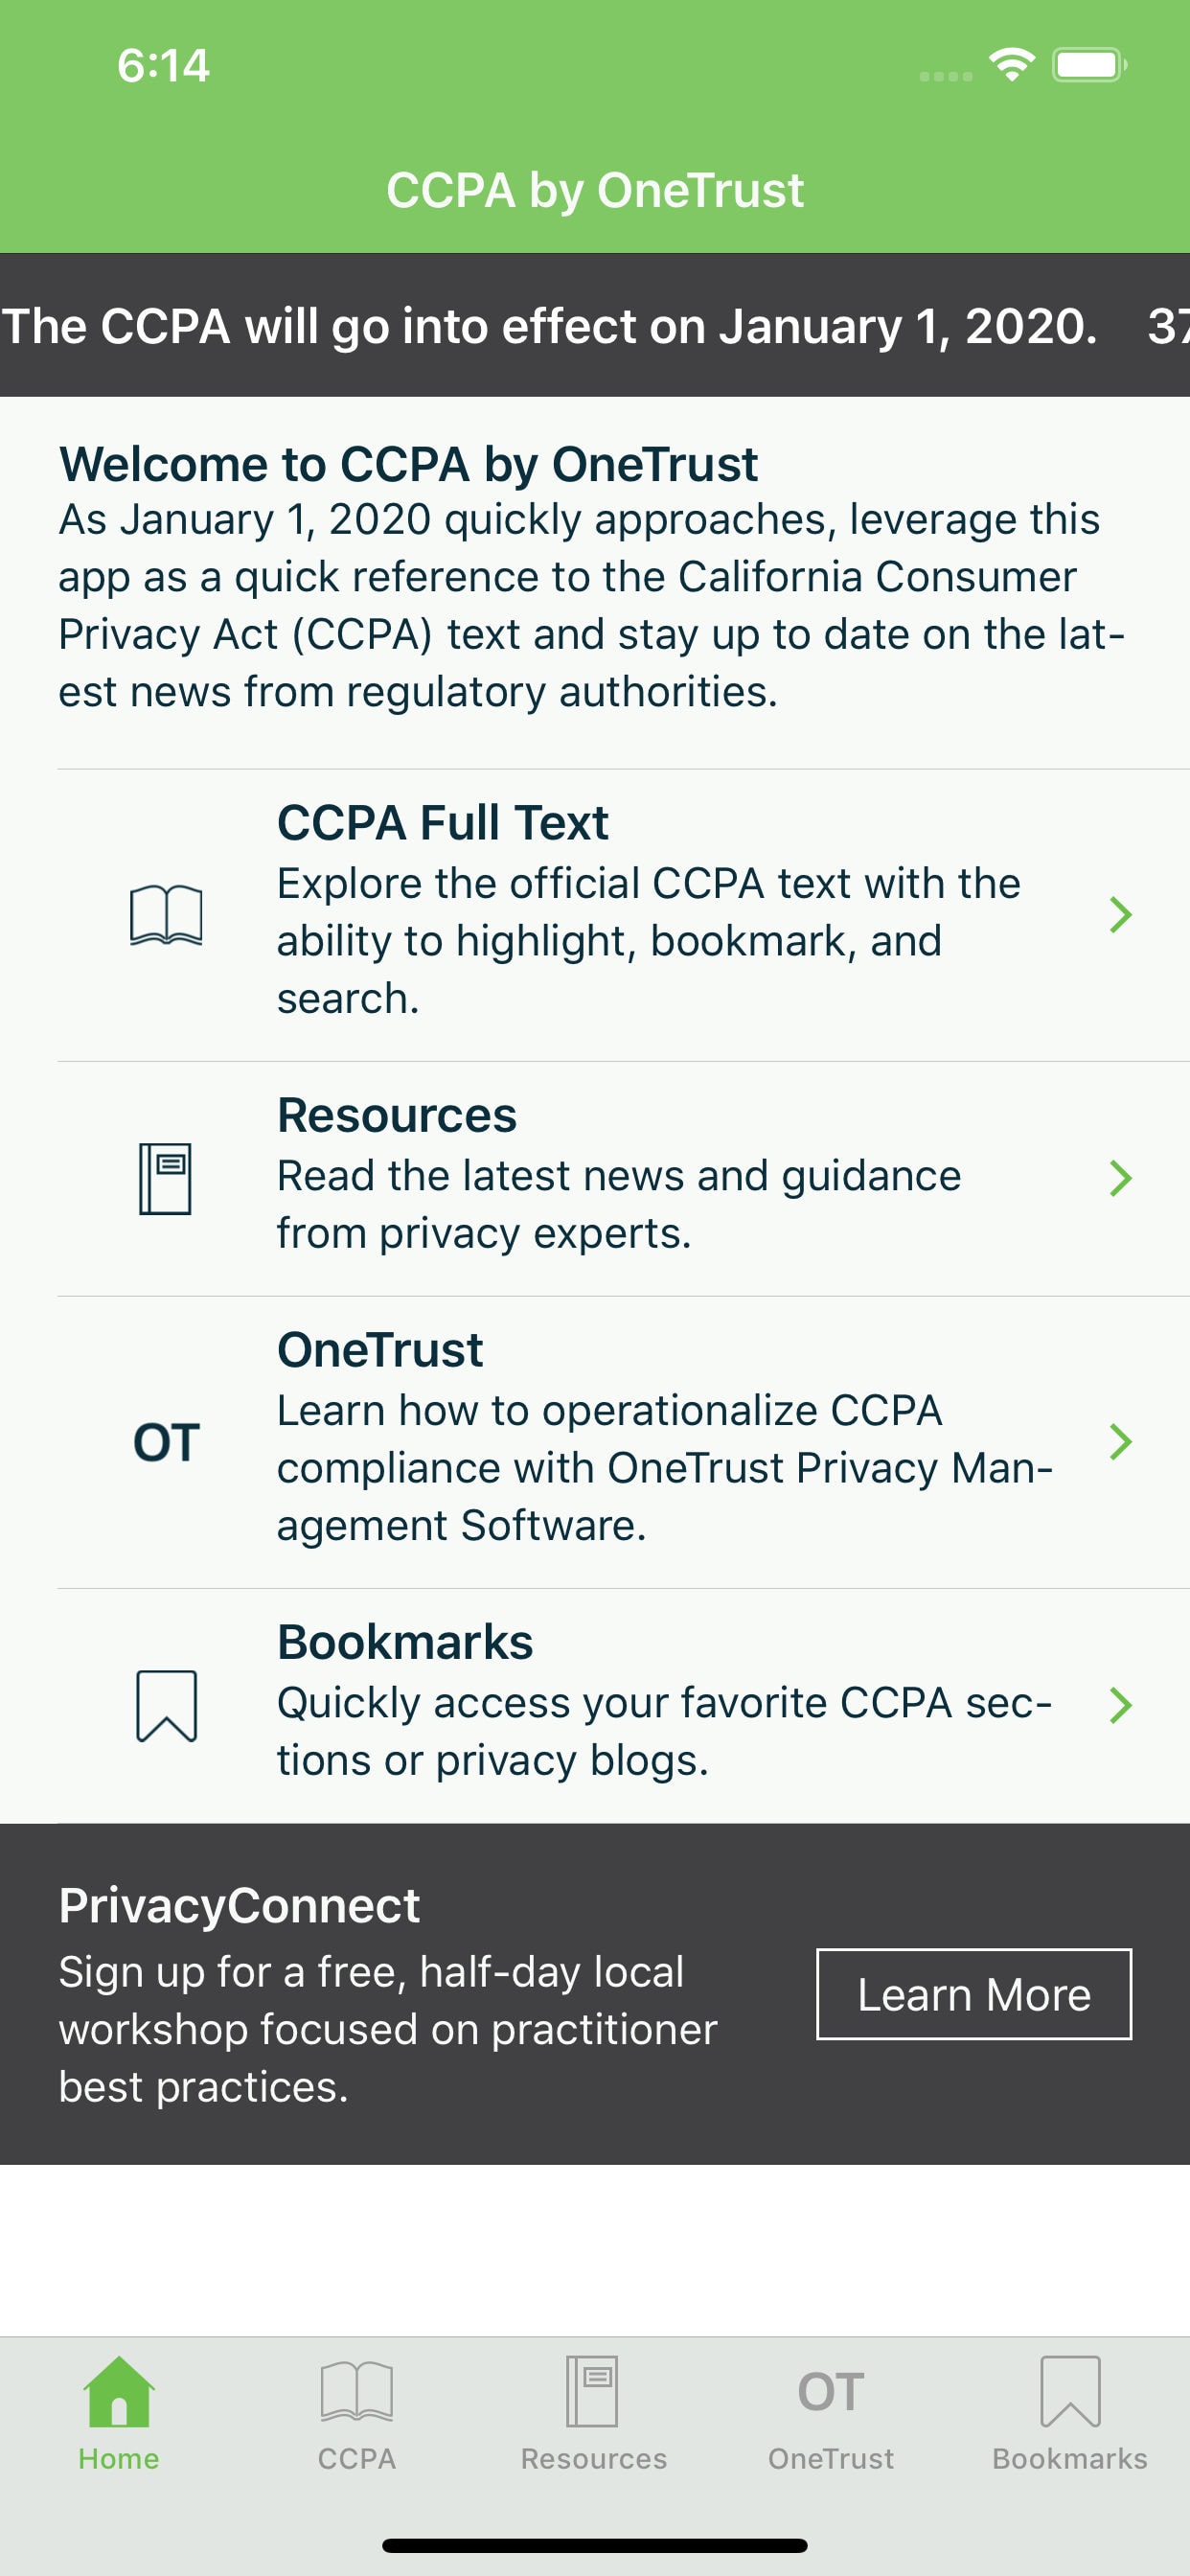 CCPA by OneTrust